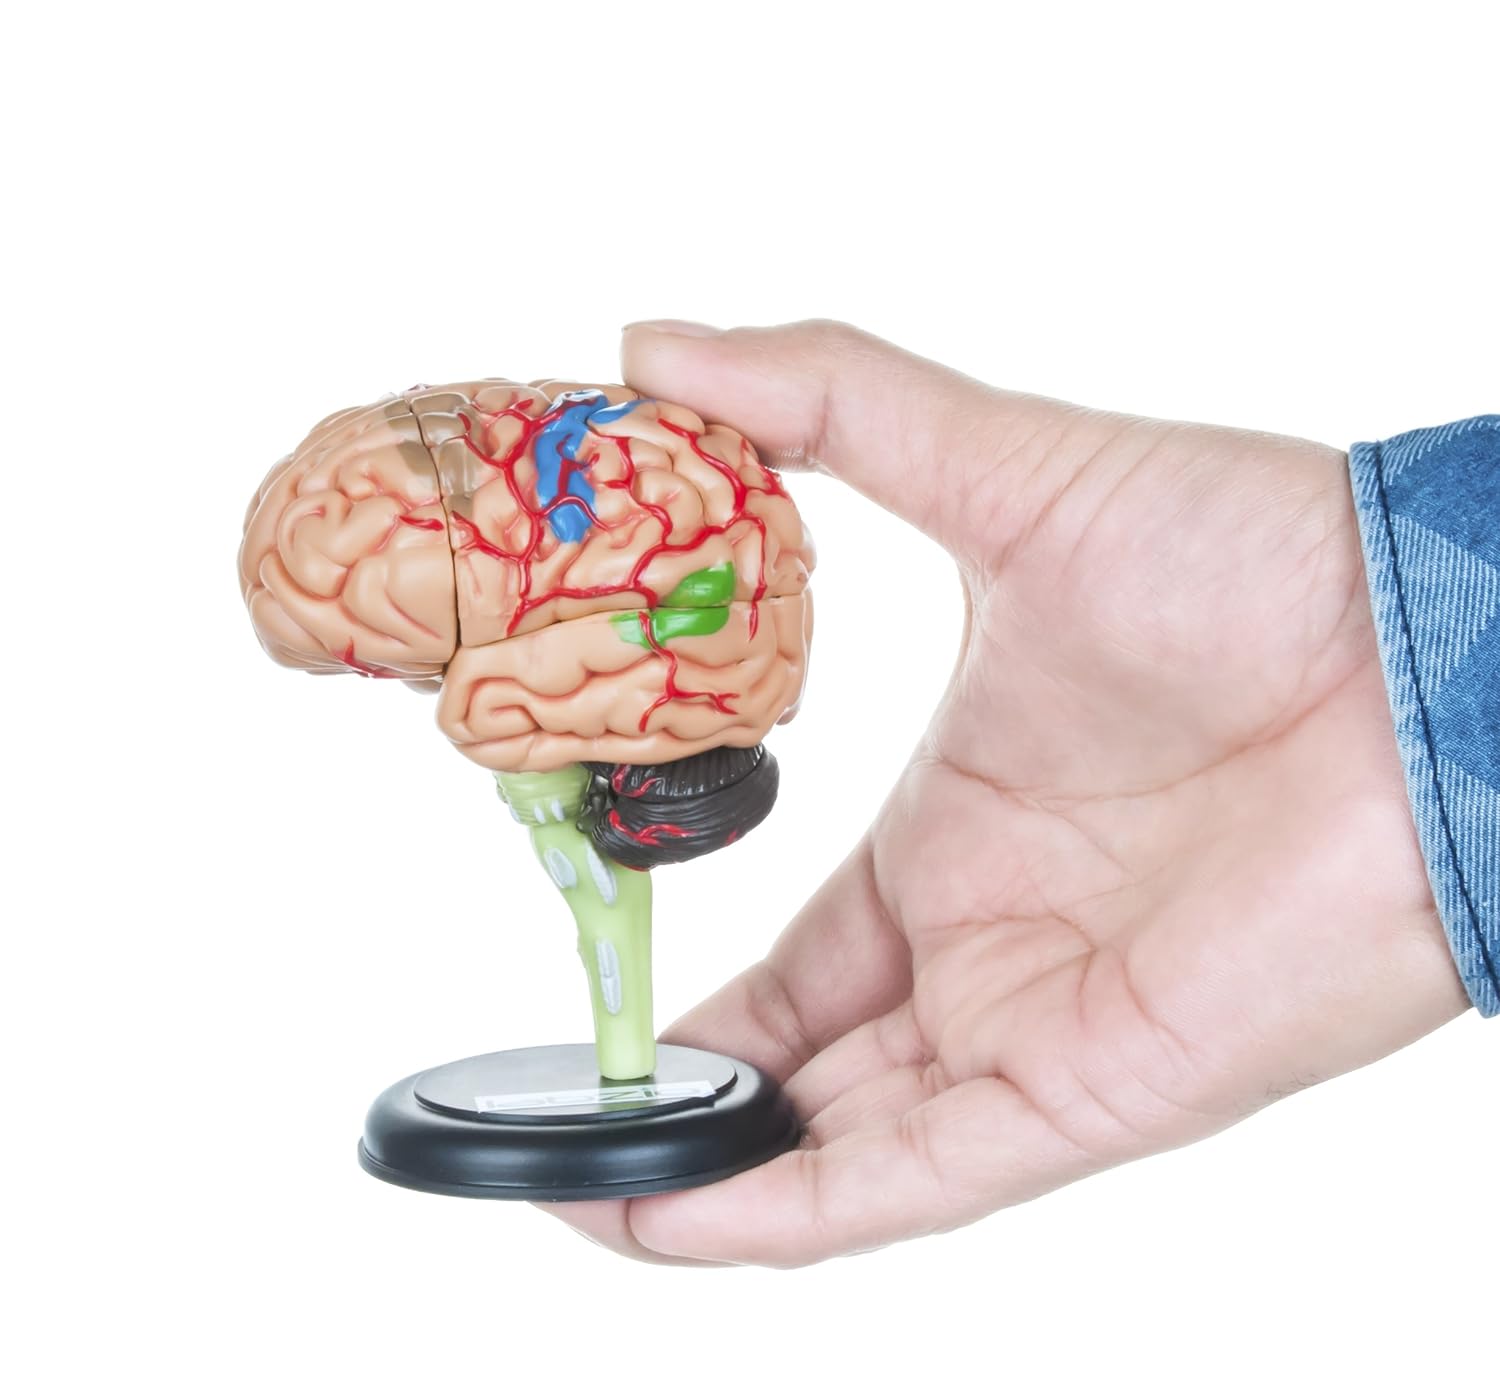 4D Human Brain Model, Mini (10 cm Tall), Dissects Into 17 Parts, A Perfect Learning For Anatomy of Brain, A Fun Learning Model For Kids and Students